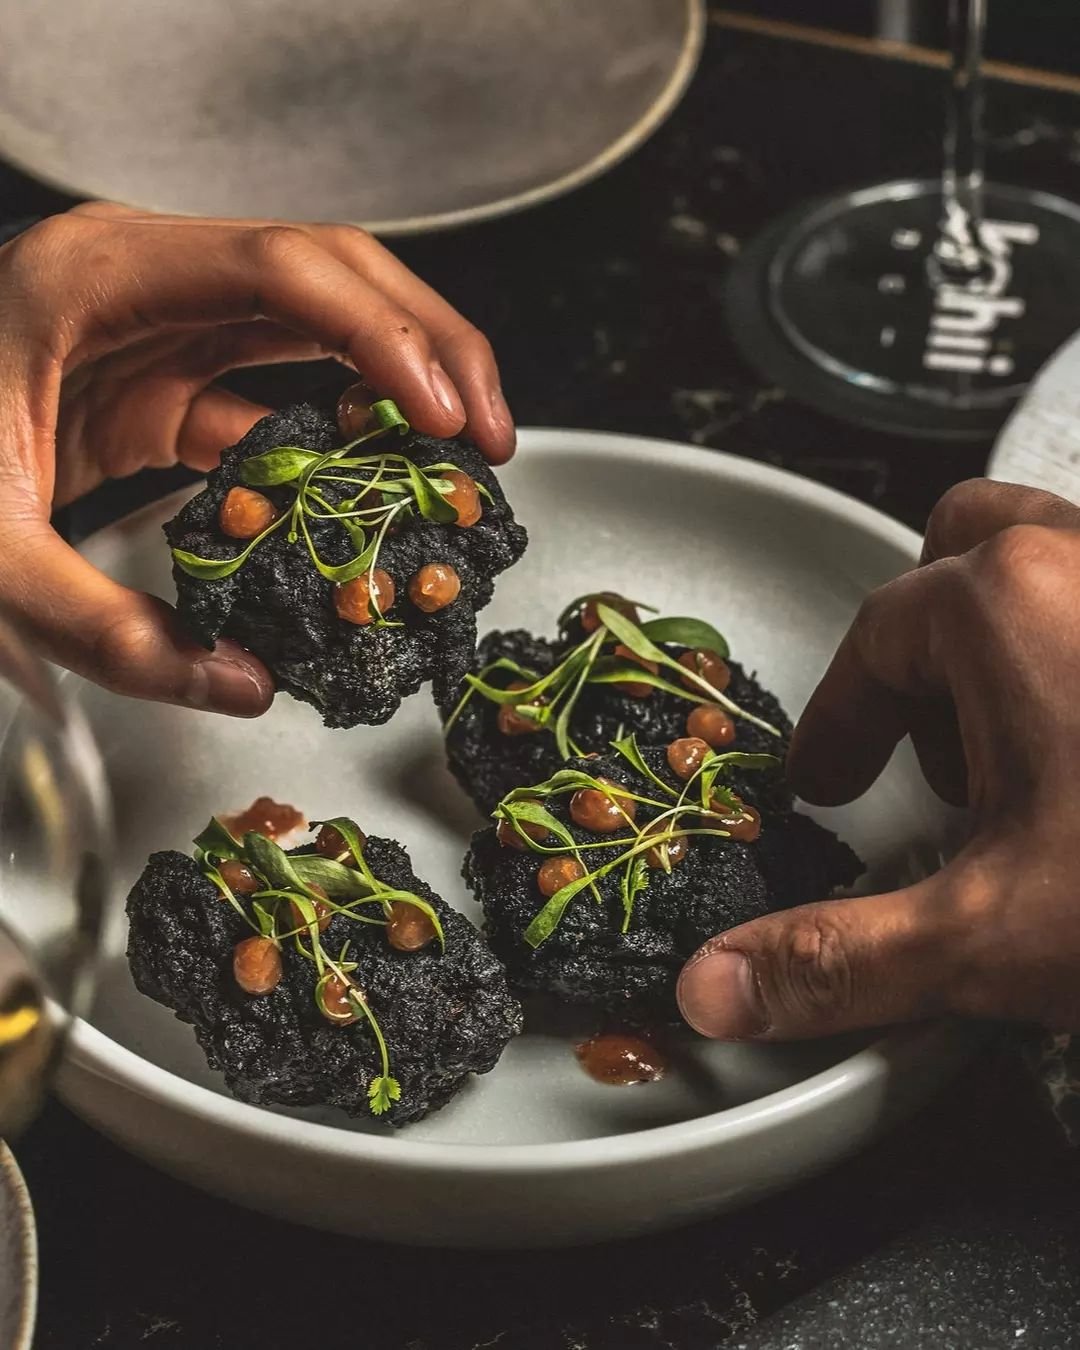 Discover the magic of Kuro Fried Chicken at Kahii tonight! Made with special ingredients and drizzled with our house-made ume sauce, this dish is sure to tantalise your taste buds. Topped with delicate micro-herbs to add a touch of nature&rsquo;s fin